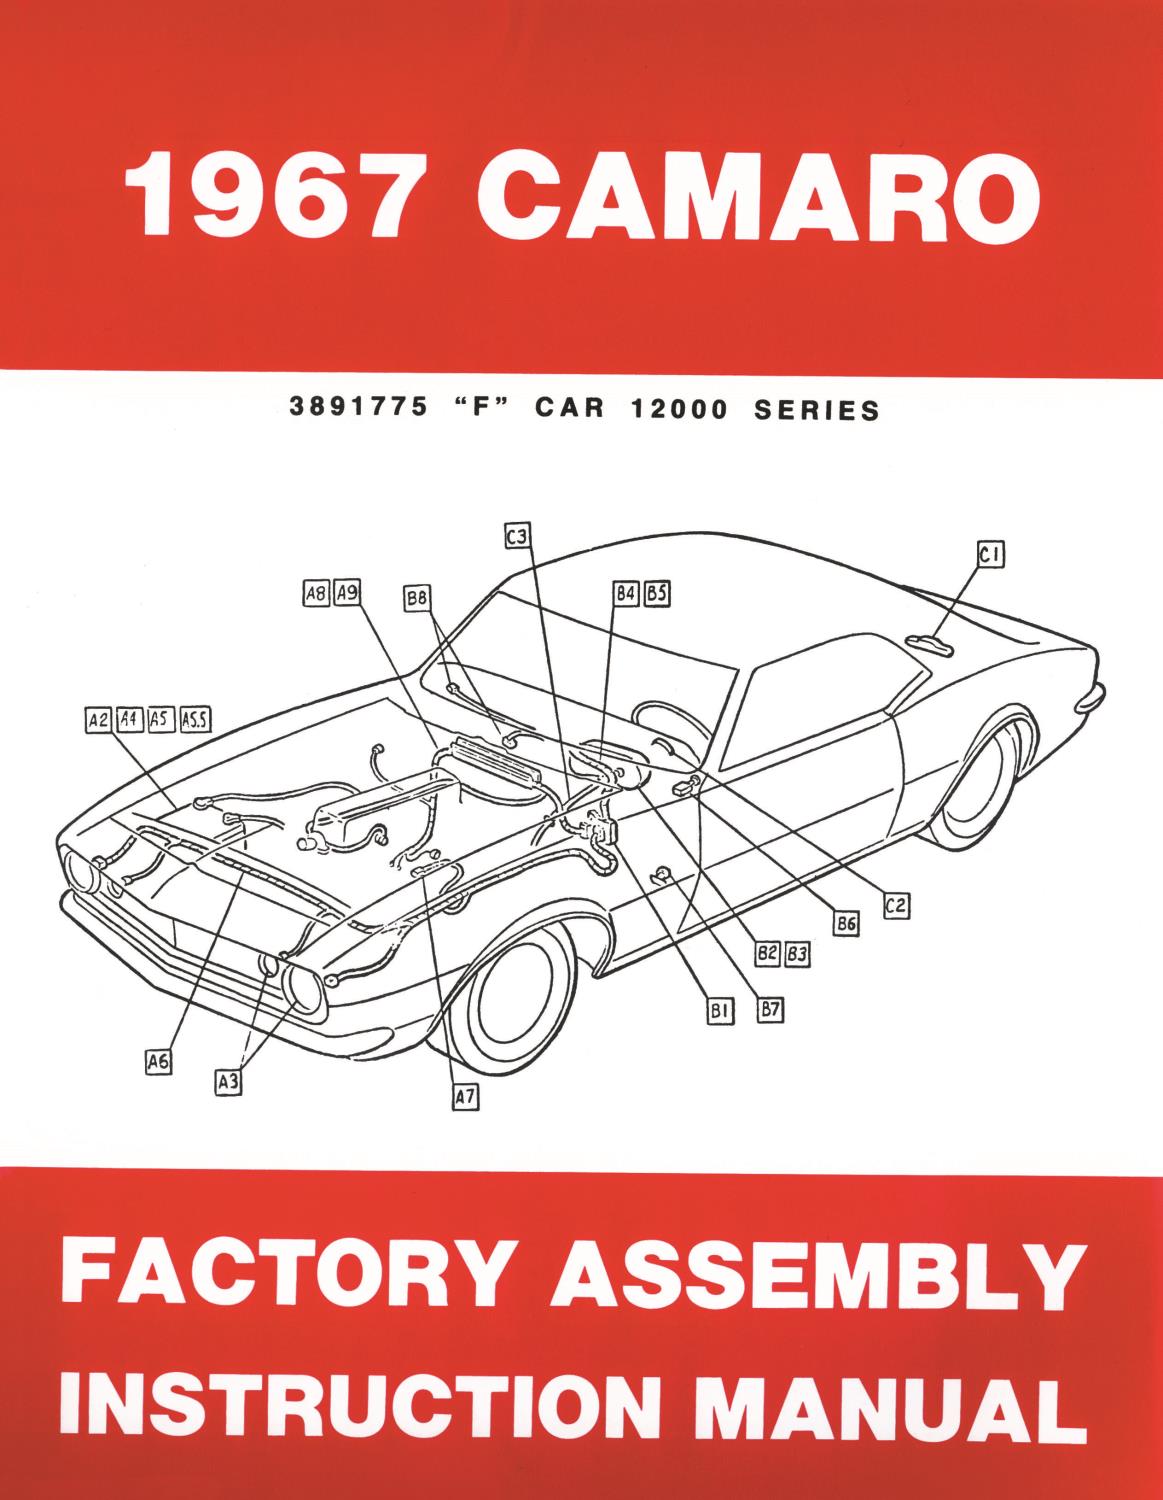 Factory Assembly Instruction Manual for 1967 Chevrolet Camaro